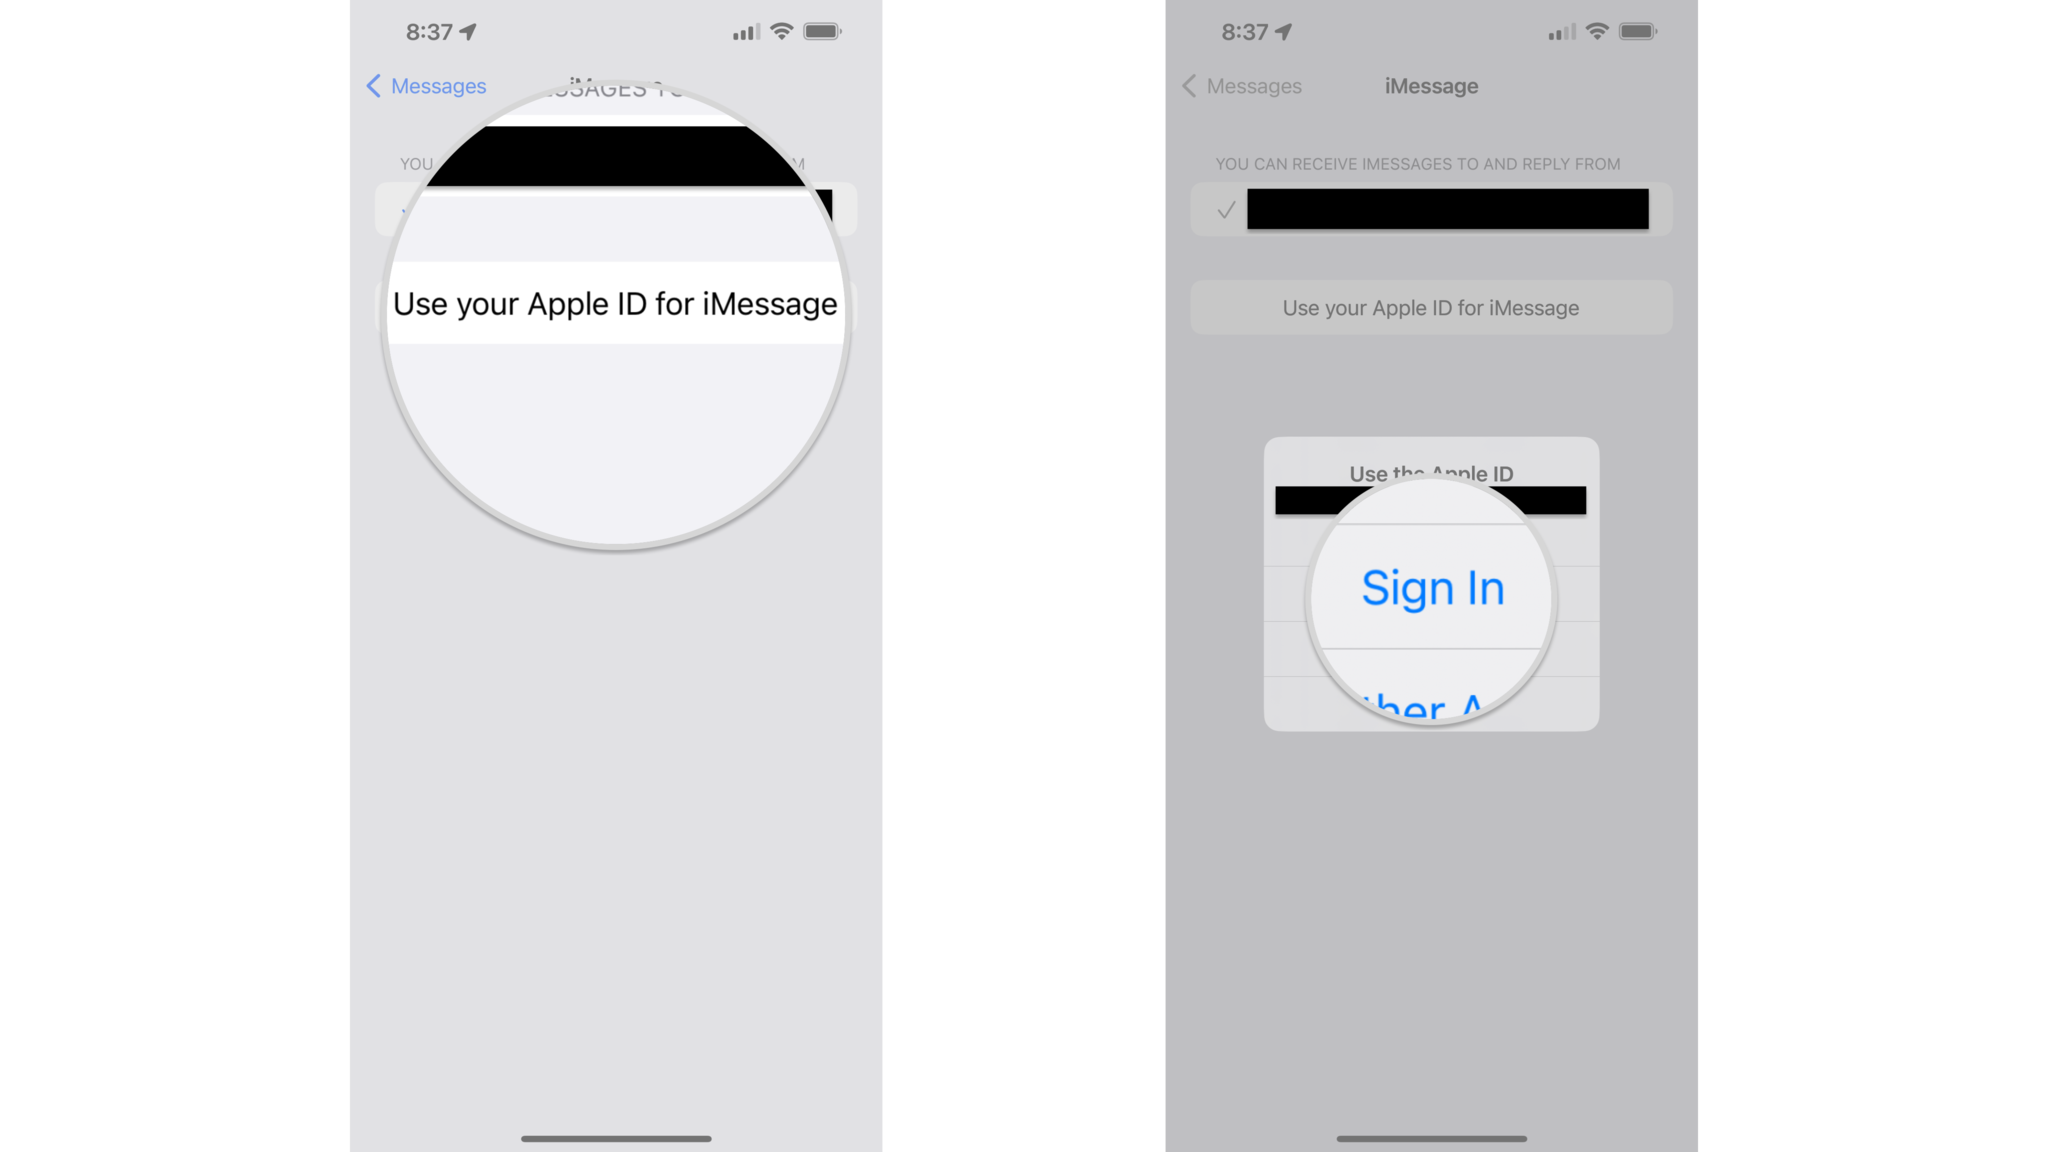 How to sign in to your Apple ID in Messages on the iPhone by showing steps: Tap Use your Apple ID for iMessage, Tap Sign in